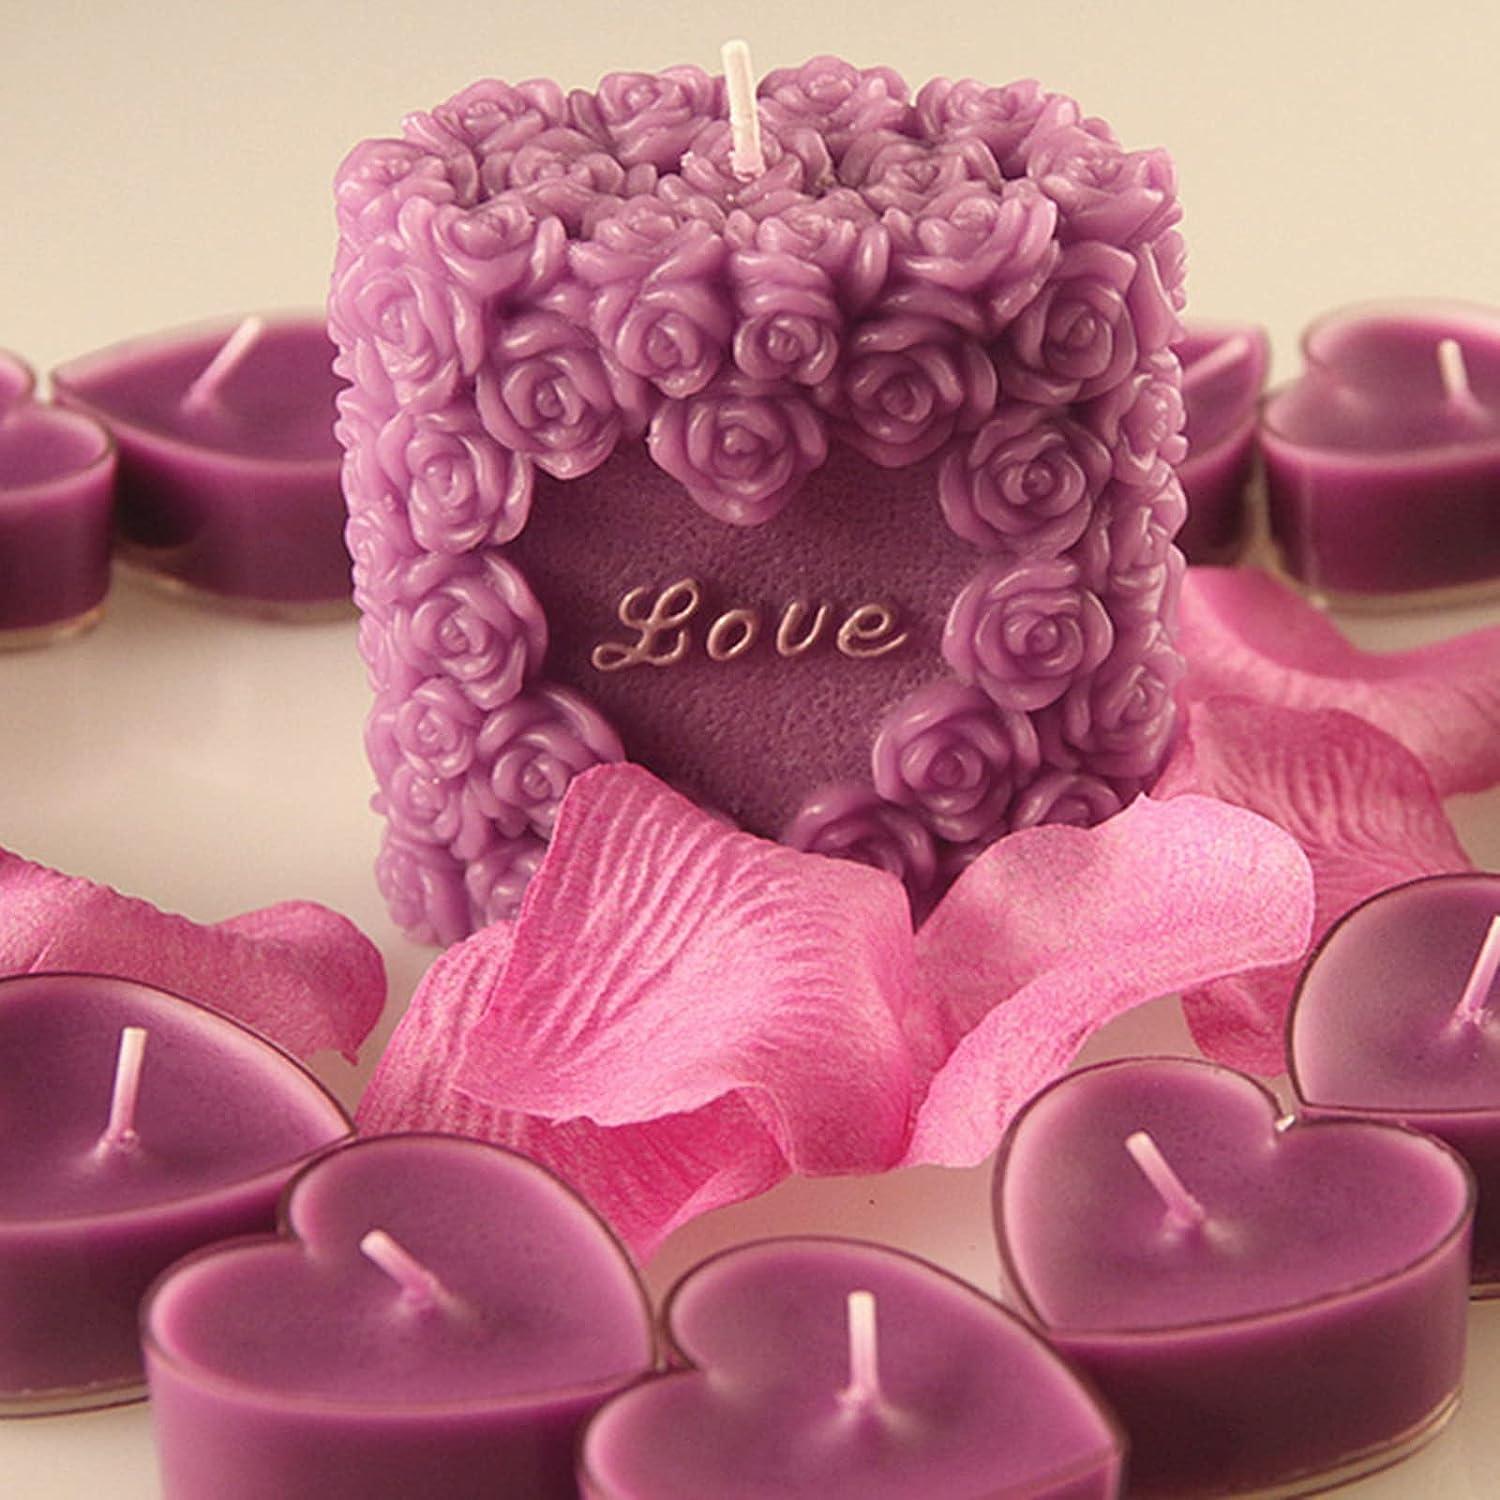 3D Flower Bouquet Mold, Romantic Love 3D Rose Bouquet Candle Molds,  Silicone Shapes for DIY Art Crafts Kit Candle Making, Home Decor Wedding,  Love